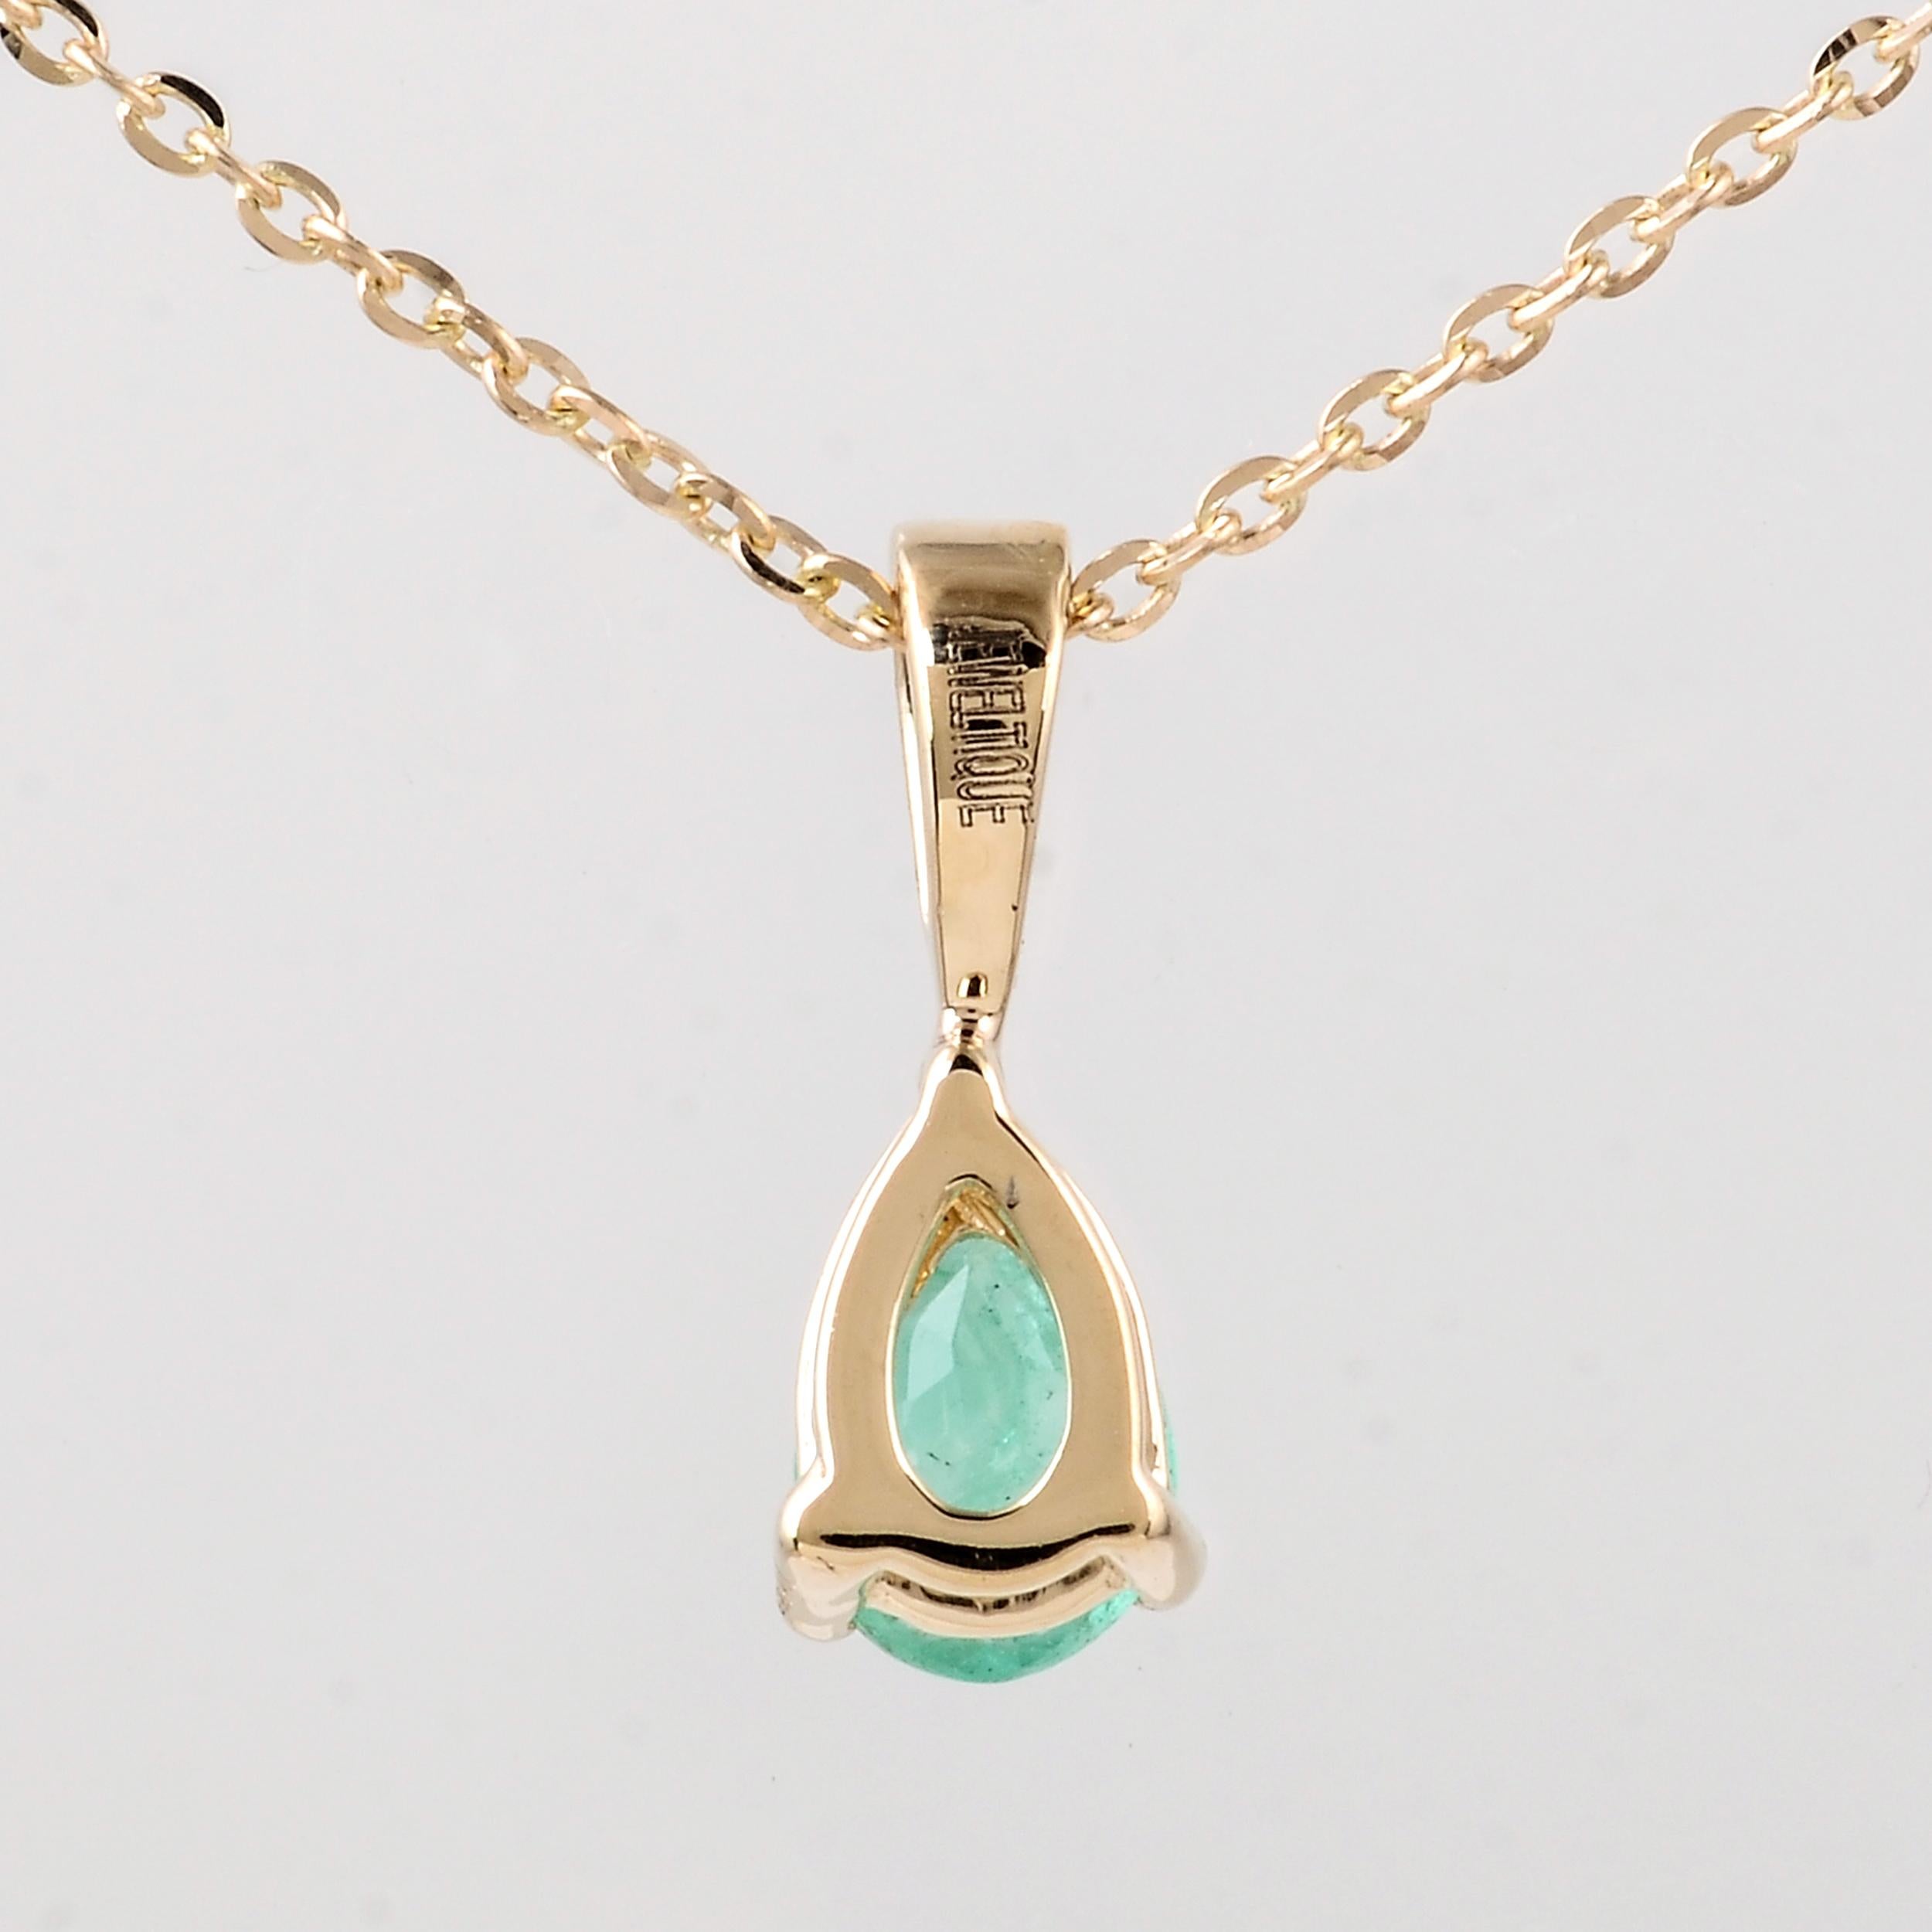 Brilliant Cut Luxury 14K Emerald Pendant Necklace  Exquisite Jewelry for Timeless Elegance